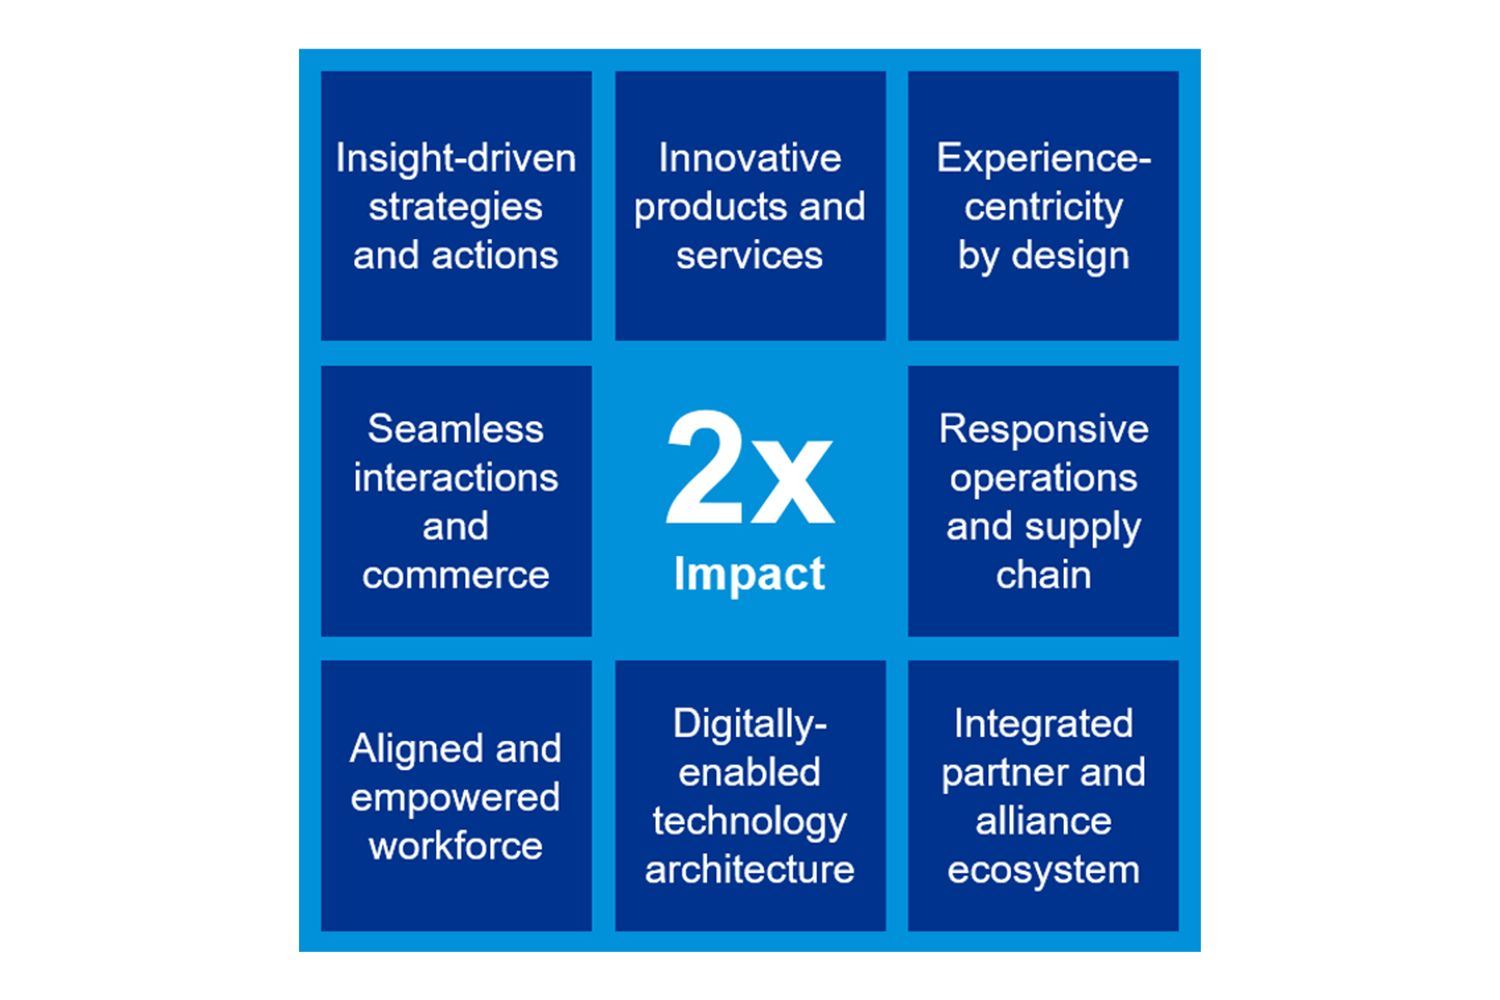 The eight capabilities of a Connected Enterprise